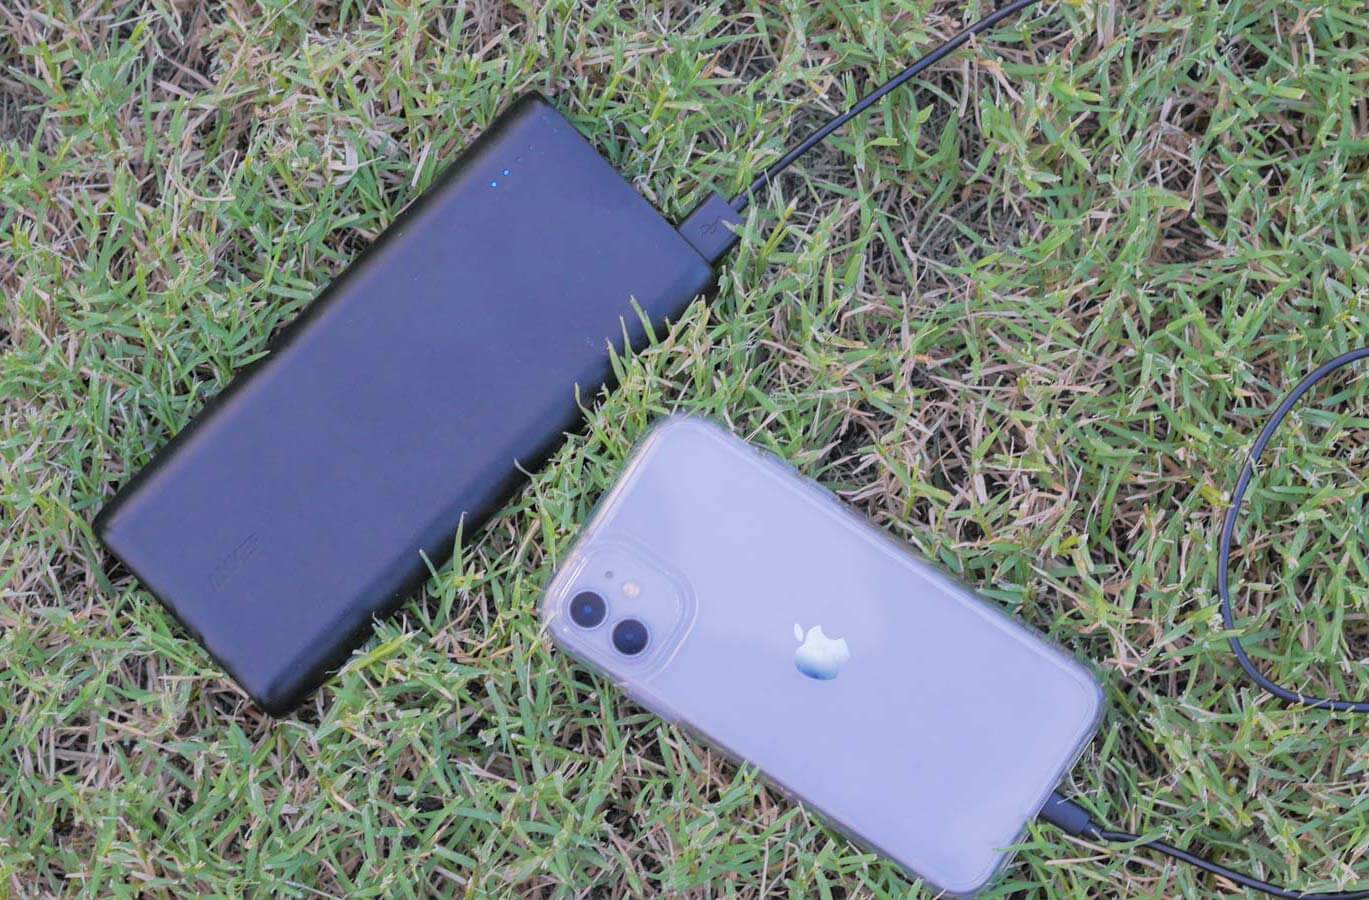 portable battery pack attached to iphone in the grass